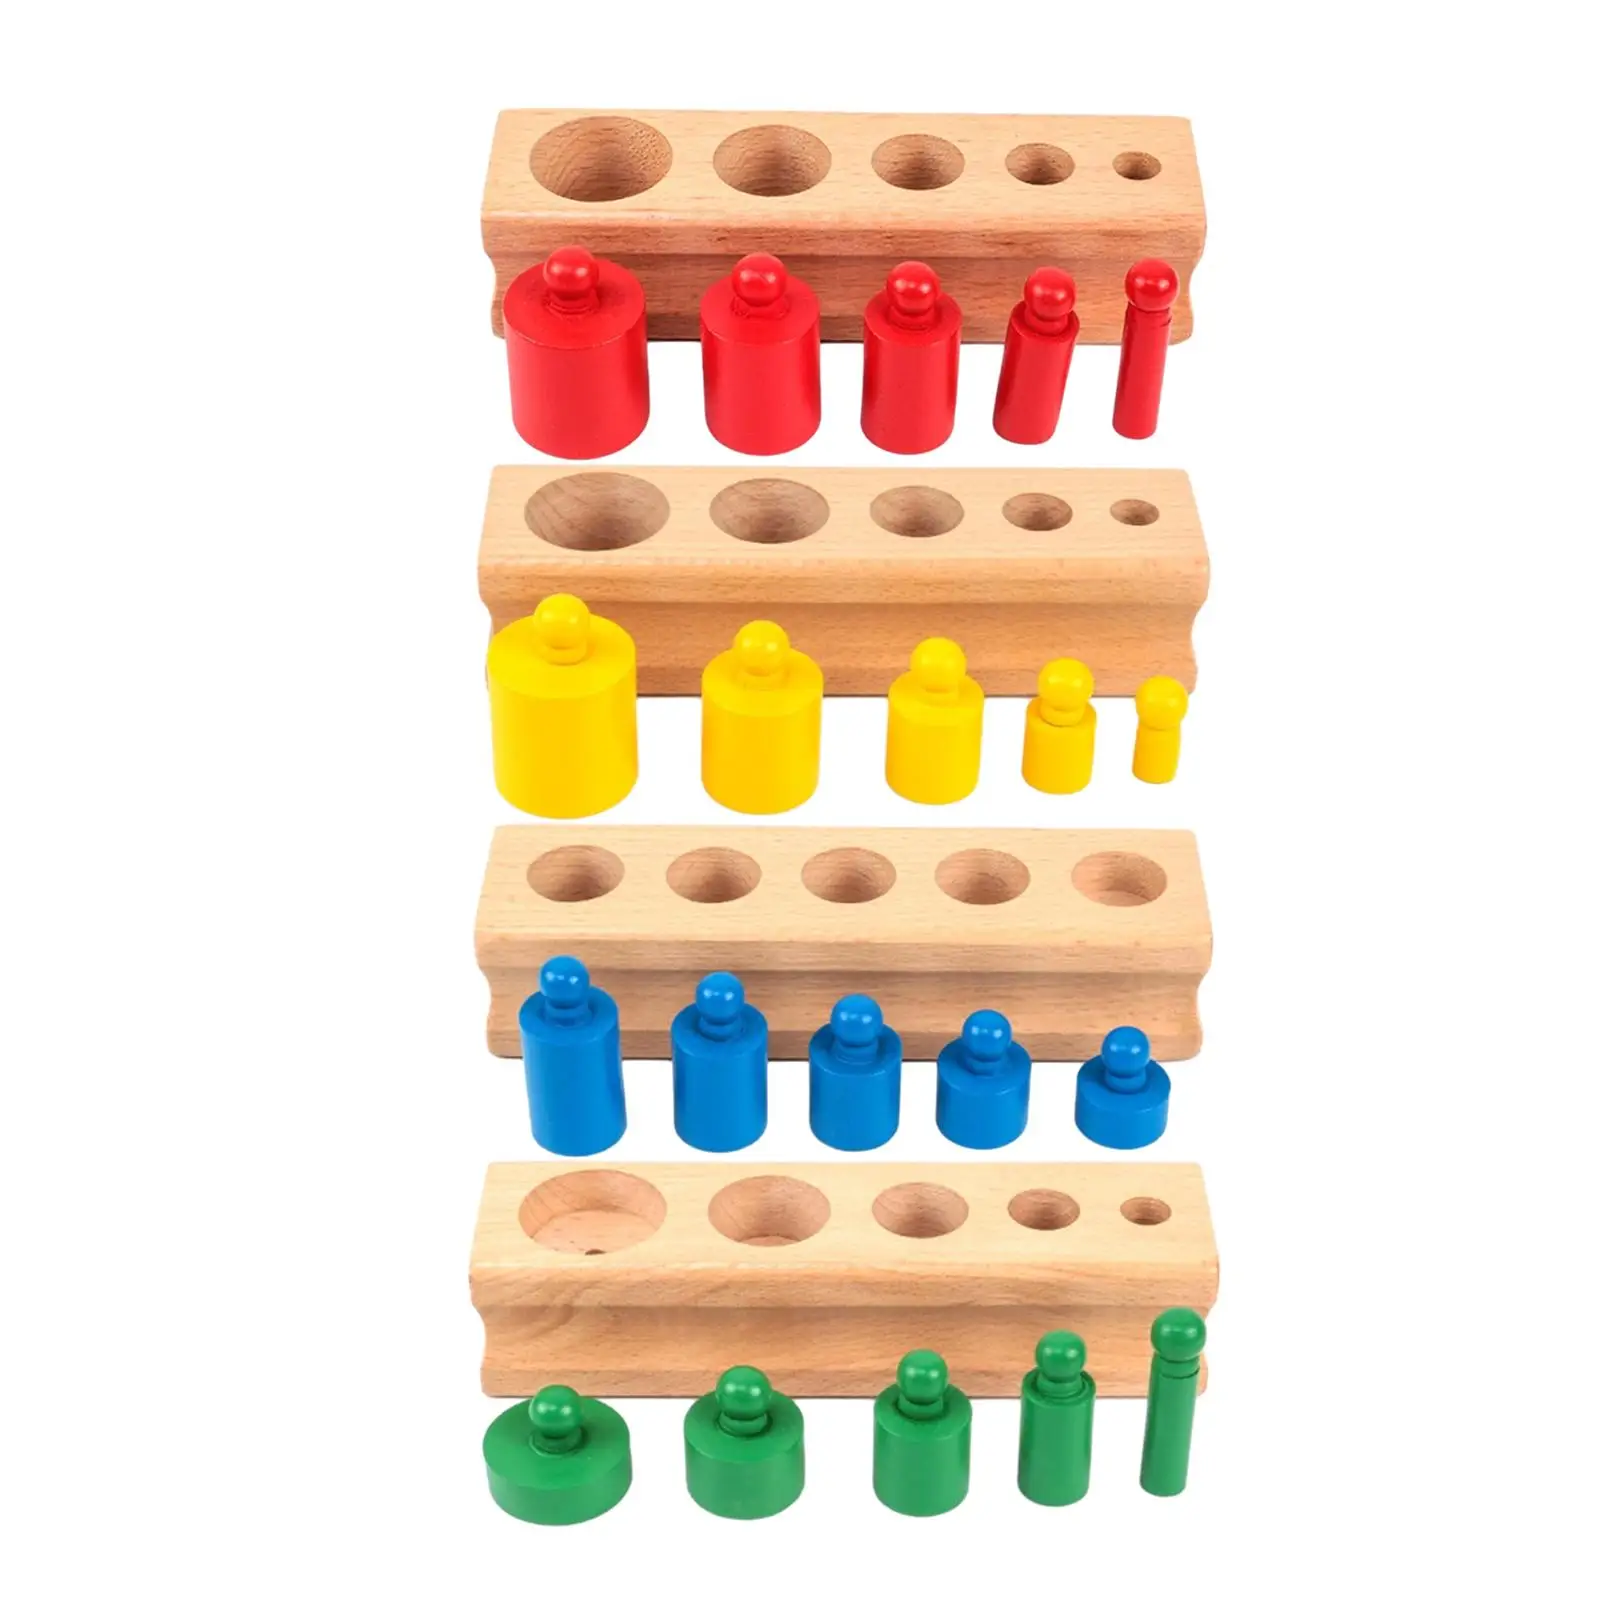 4x Montessori Toy Board Game Educational Early Development Knobbed Cylinders Blocks Socket for School Preschool Toys Toddlers